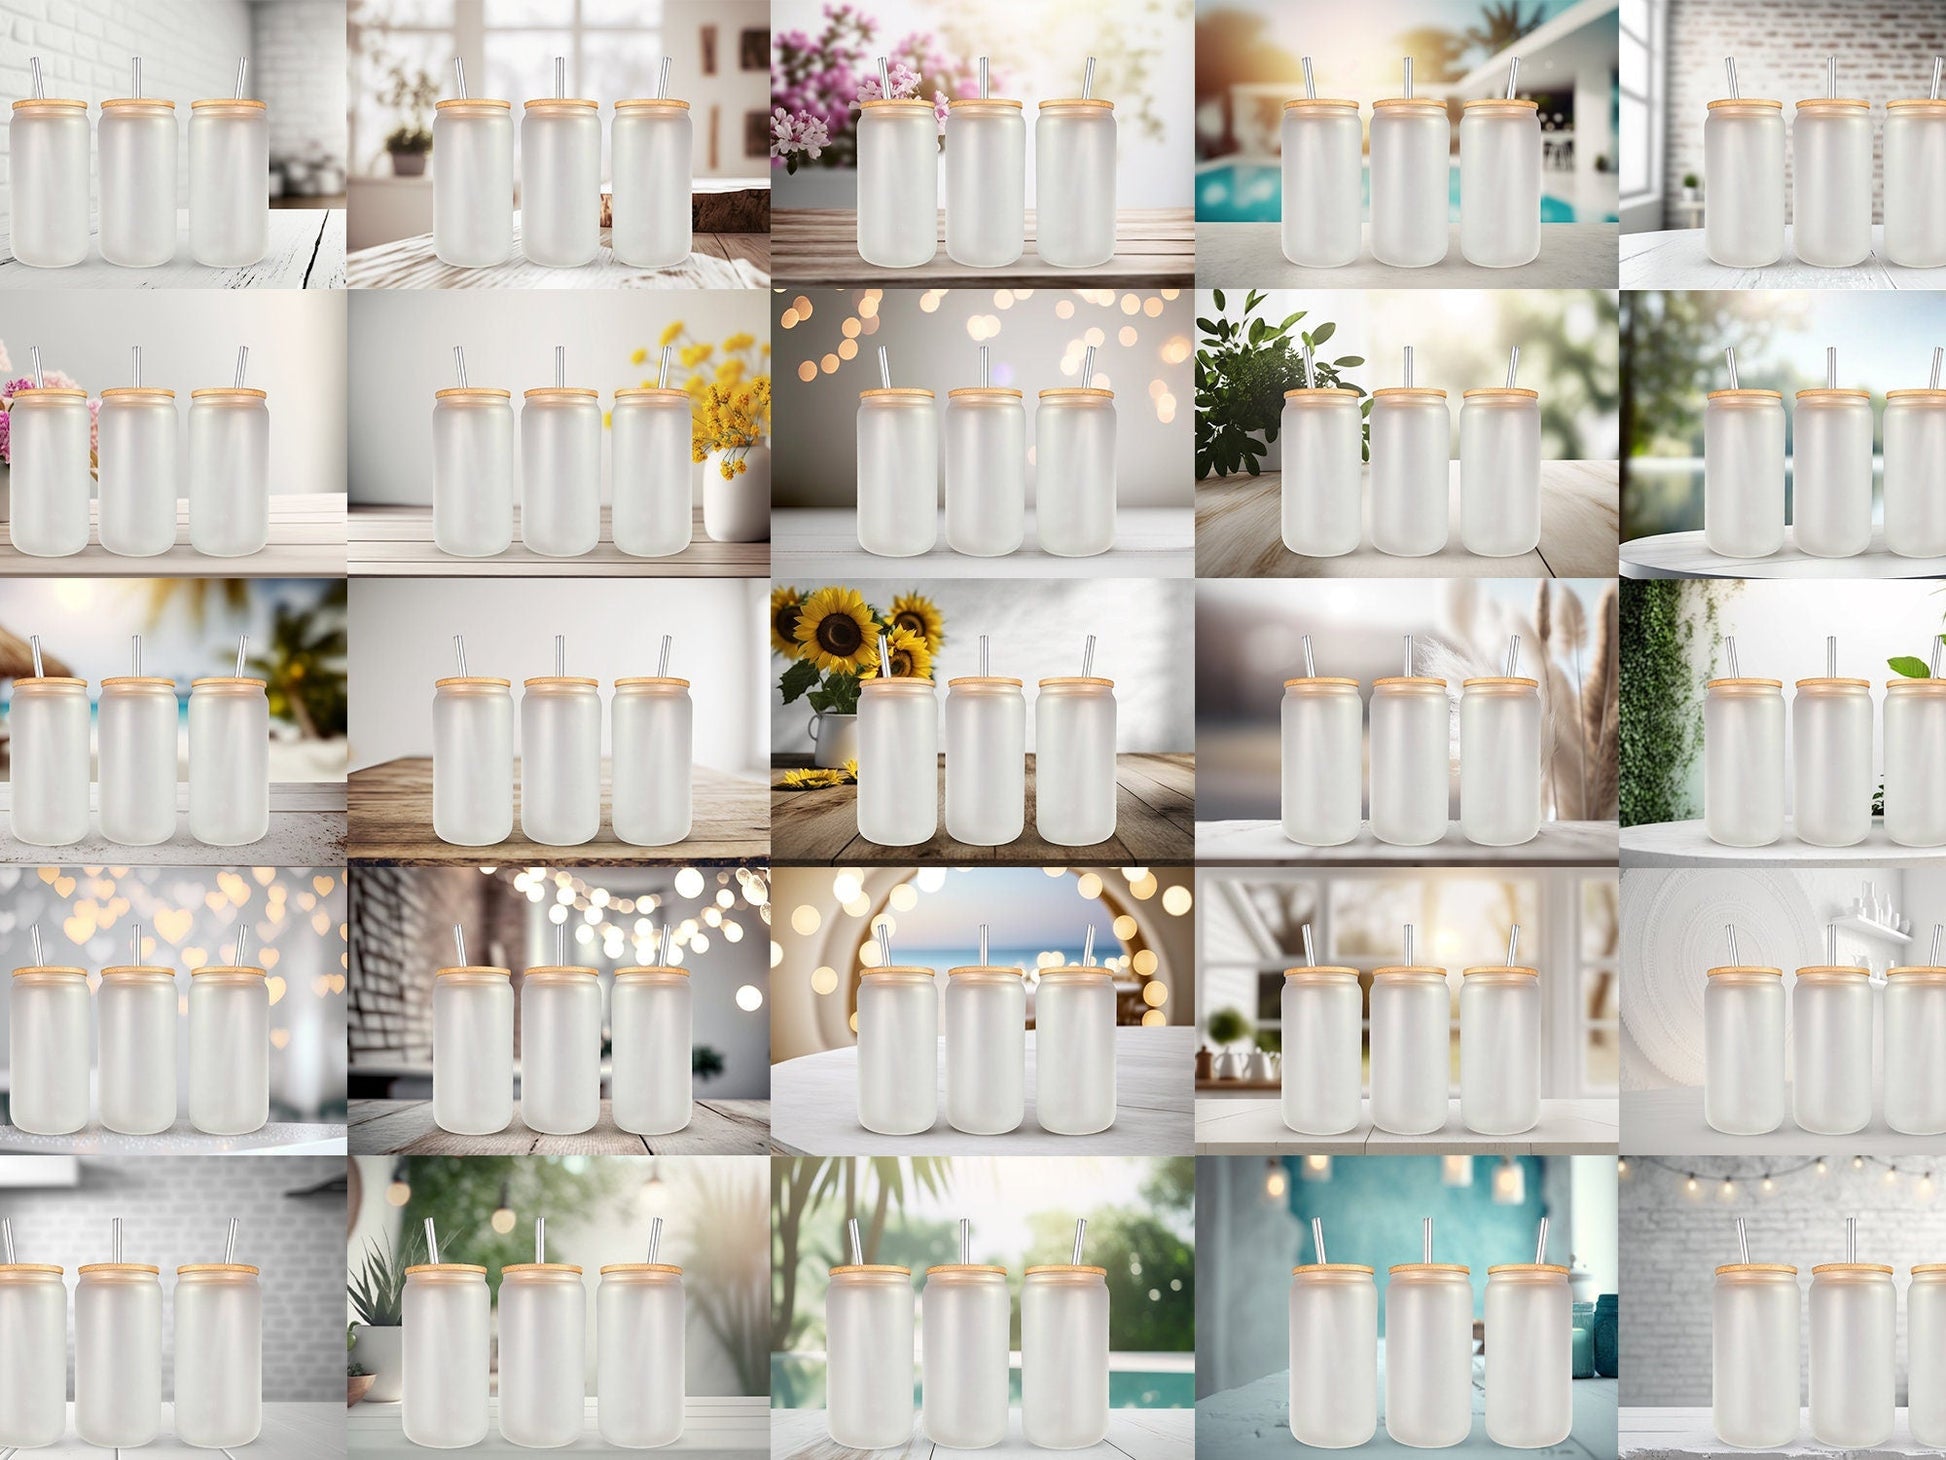 100 Frosted 16oz Libbey Glass Can Mock Ups Canva Templates AND PSD - Edit in CANVA, Photoshop, 100 Backgrounds - VartDigitals